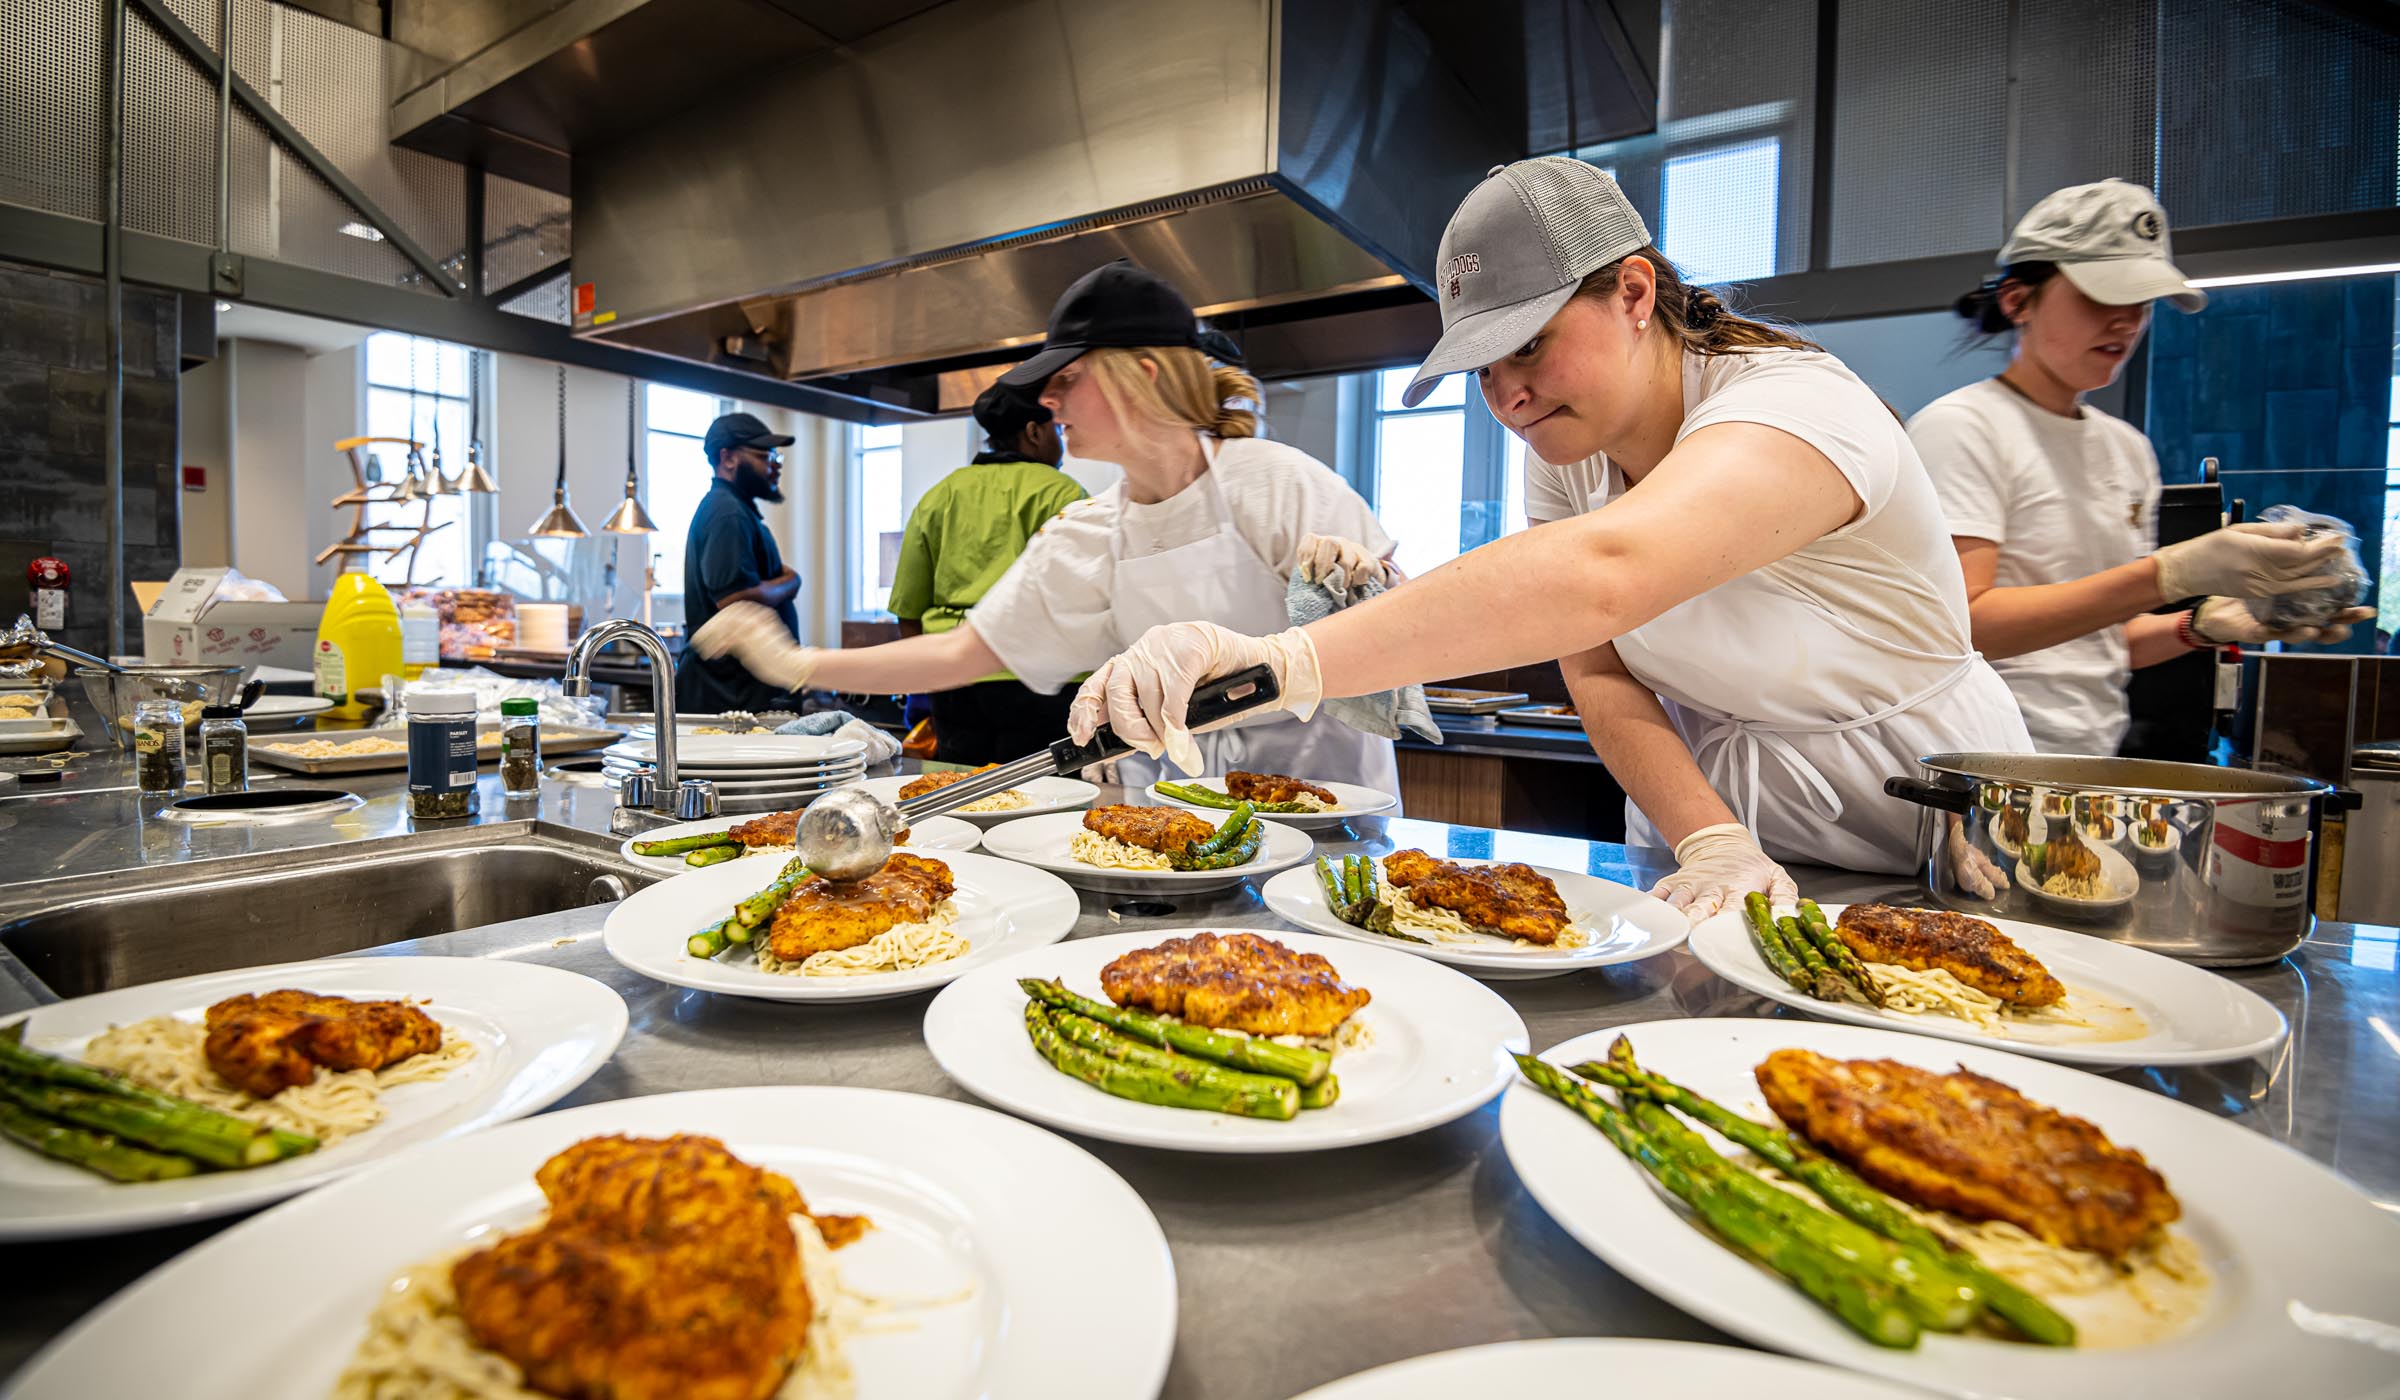 Students preparing food in commercial kitchen